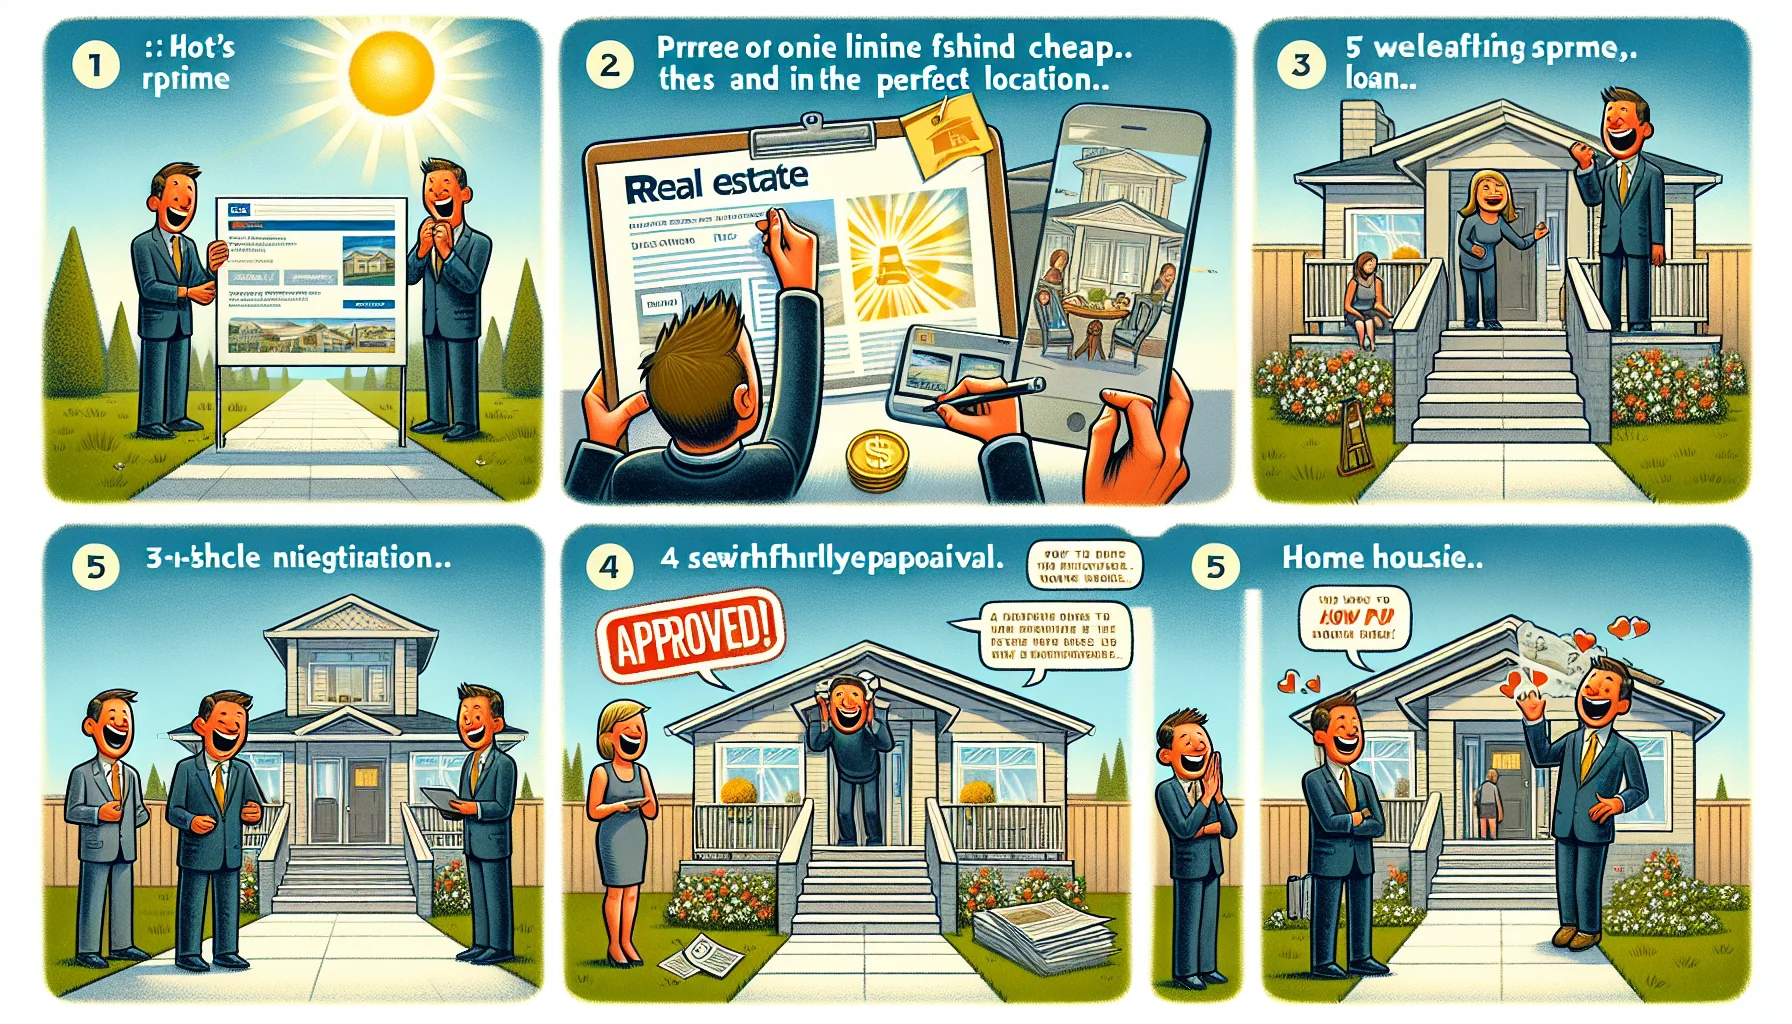 An amusing, realistic visual guide illustrating the steps to purchase a home under a dream real estate scenario. Step 1: An ecstatic individual finding the perfect online listing, it's cheap and in the perfect location. Step 2: A sunny day at the open house, guests are awestruck by the well-kept premises and quaint decor. Step 3: A swift pre-approval of a home loan displayed via a bright, highlighted 'approved' stamp on paperwork. Step 4: A seamless negotiation process where the seller willingly decreases the price. Step 5: A visibly satisfied person, keys in hand, standing in front of their newly purchased house.